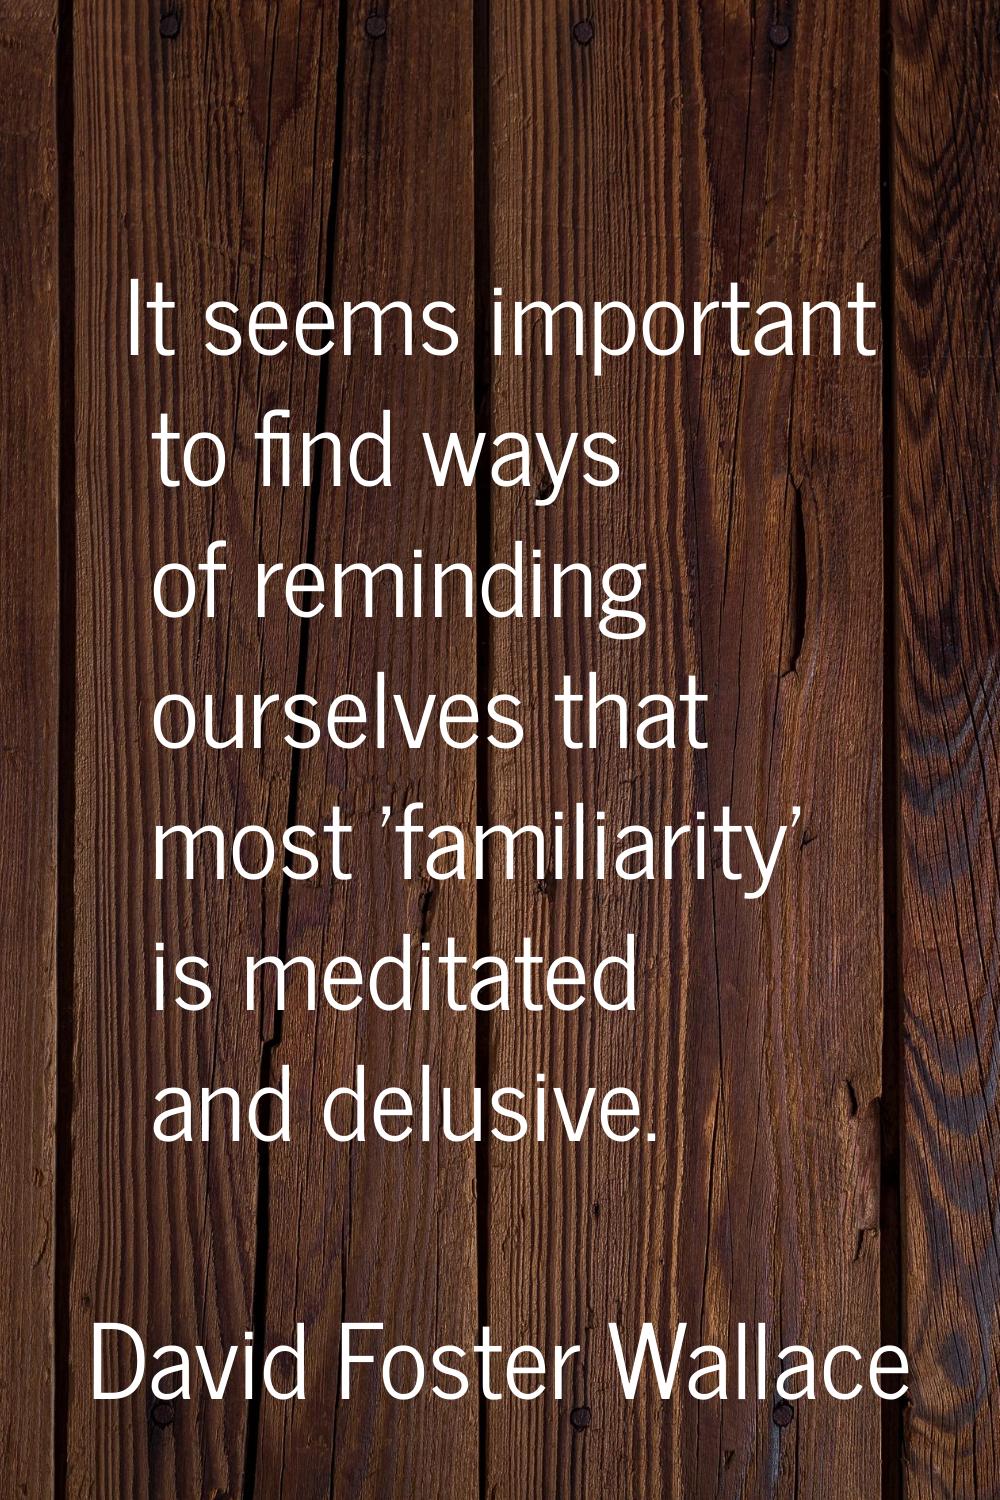 It seems important to find ways of reminding ourselves that most 'familiarity' is meditated and del